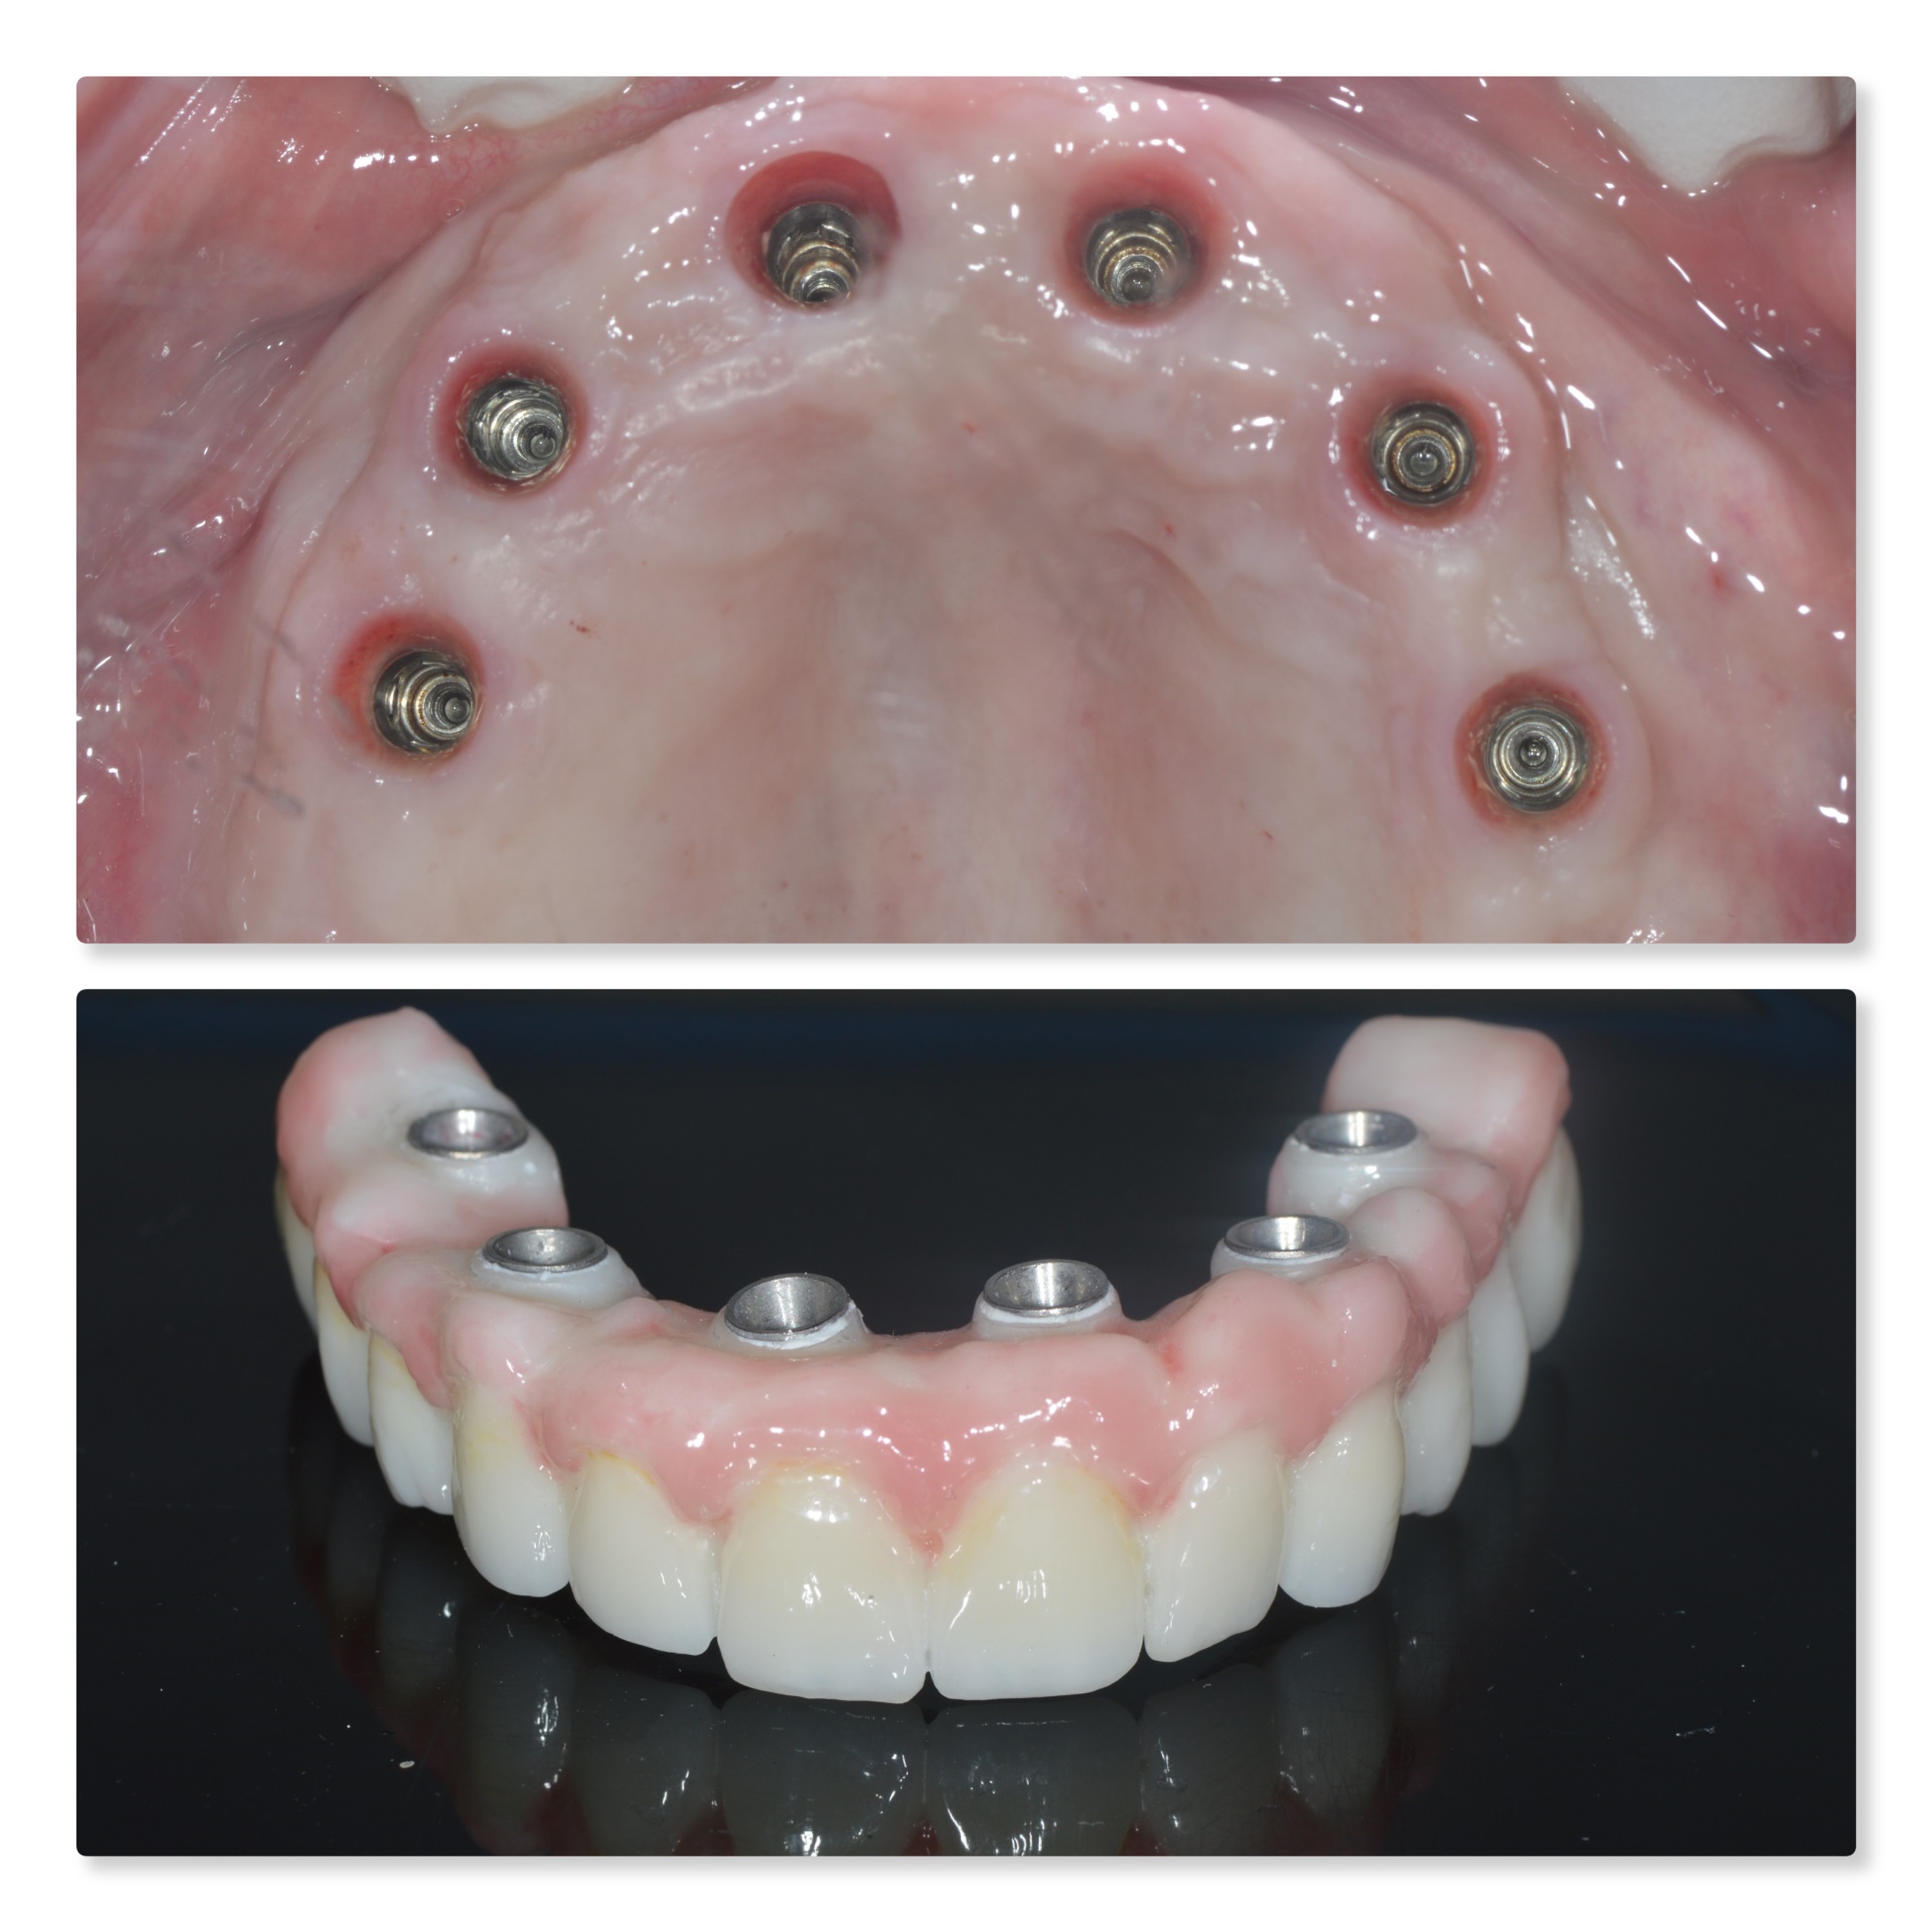 A full-arch implant-supported zirconia prosthesis